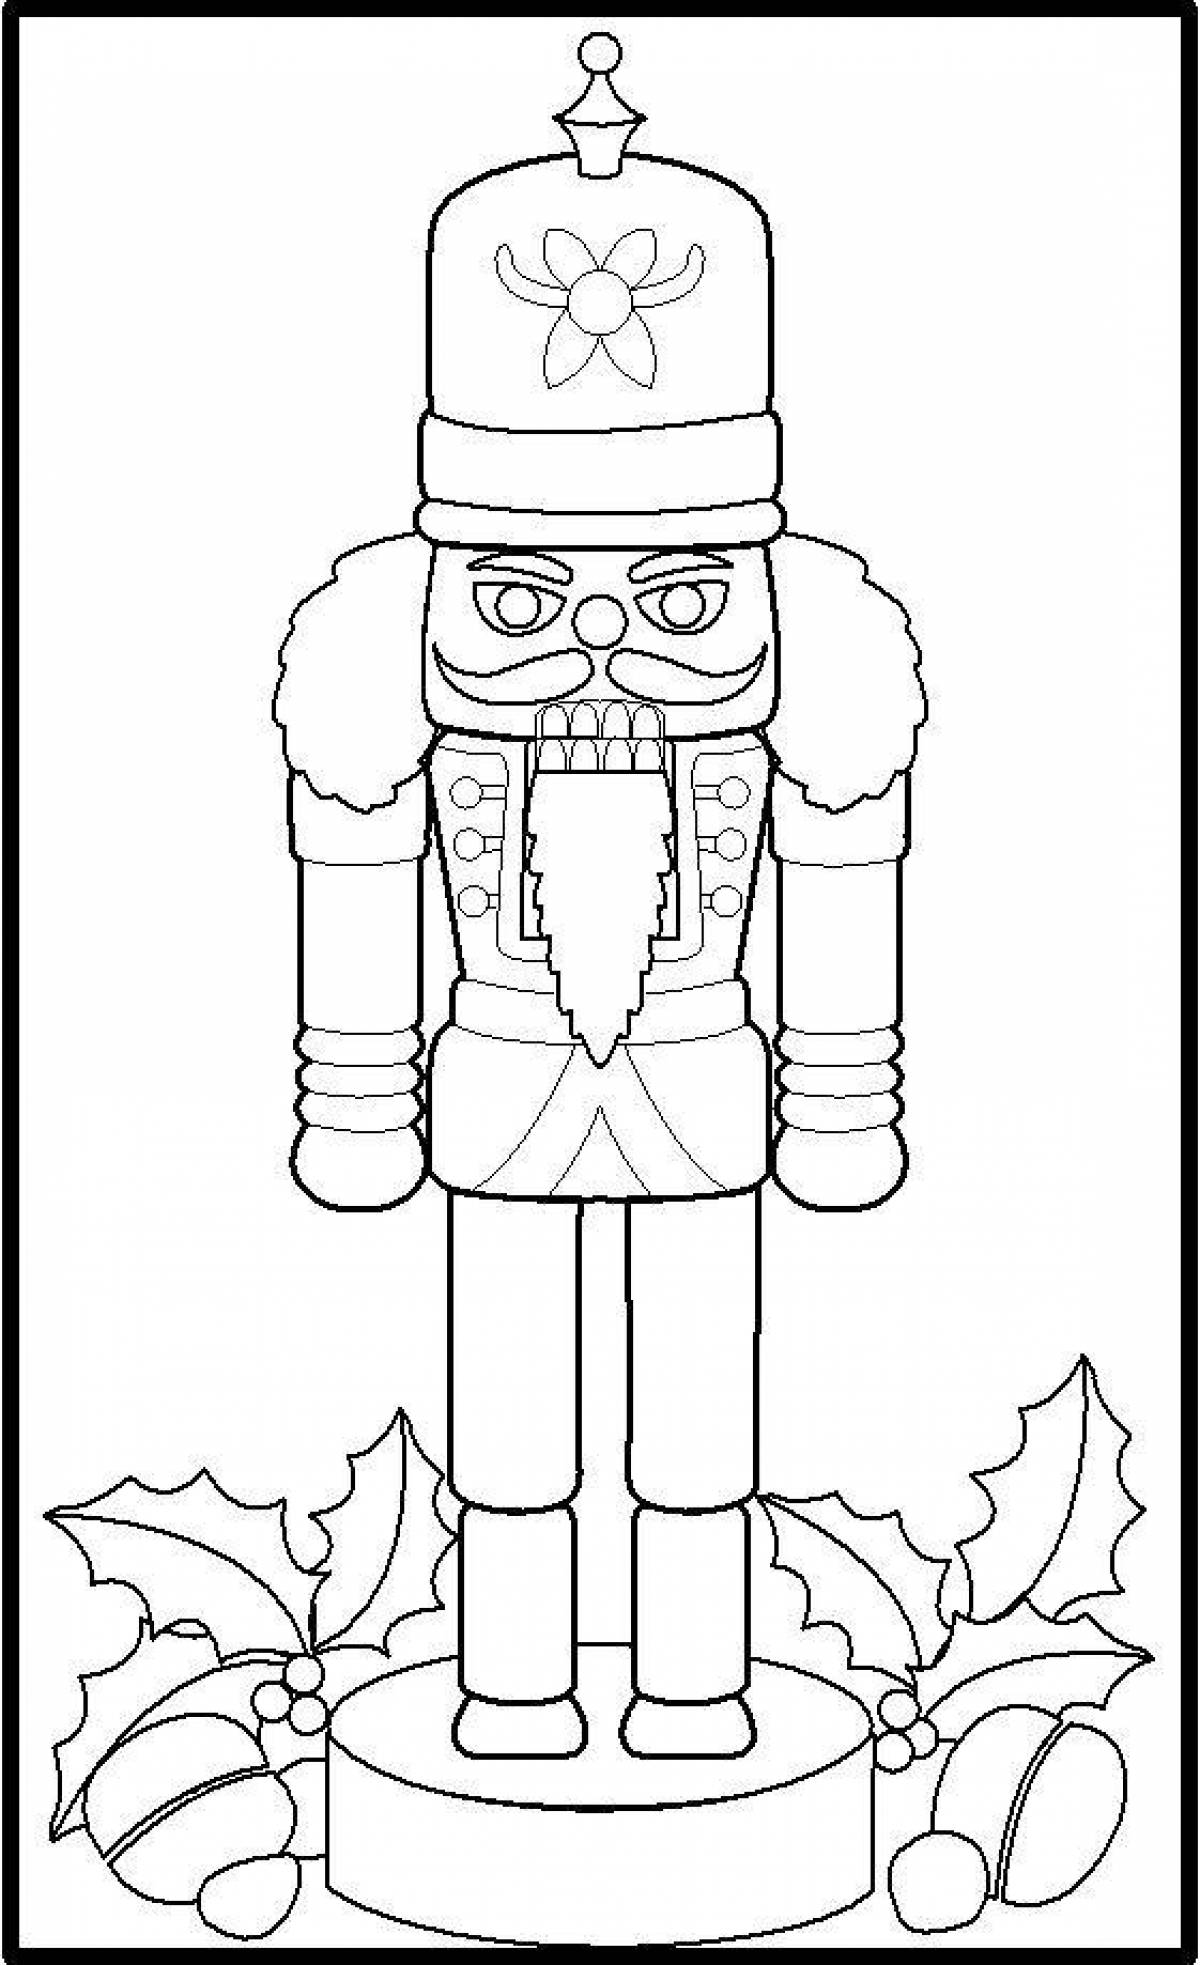 Coloring page playful nutcracker and mouse king